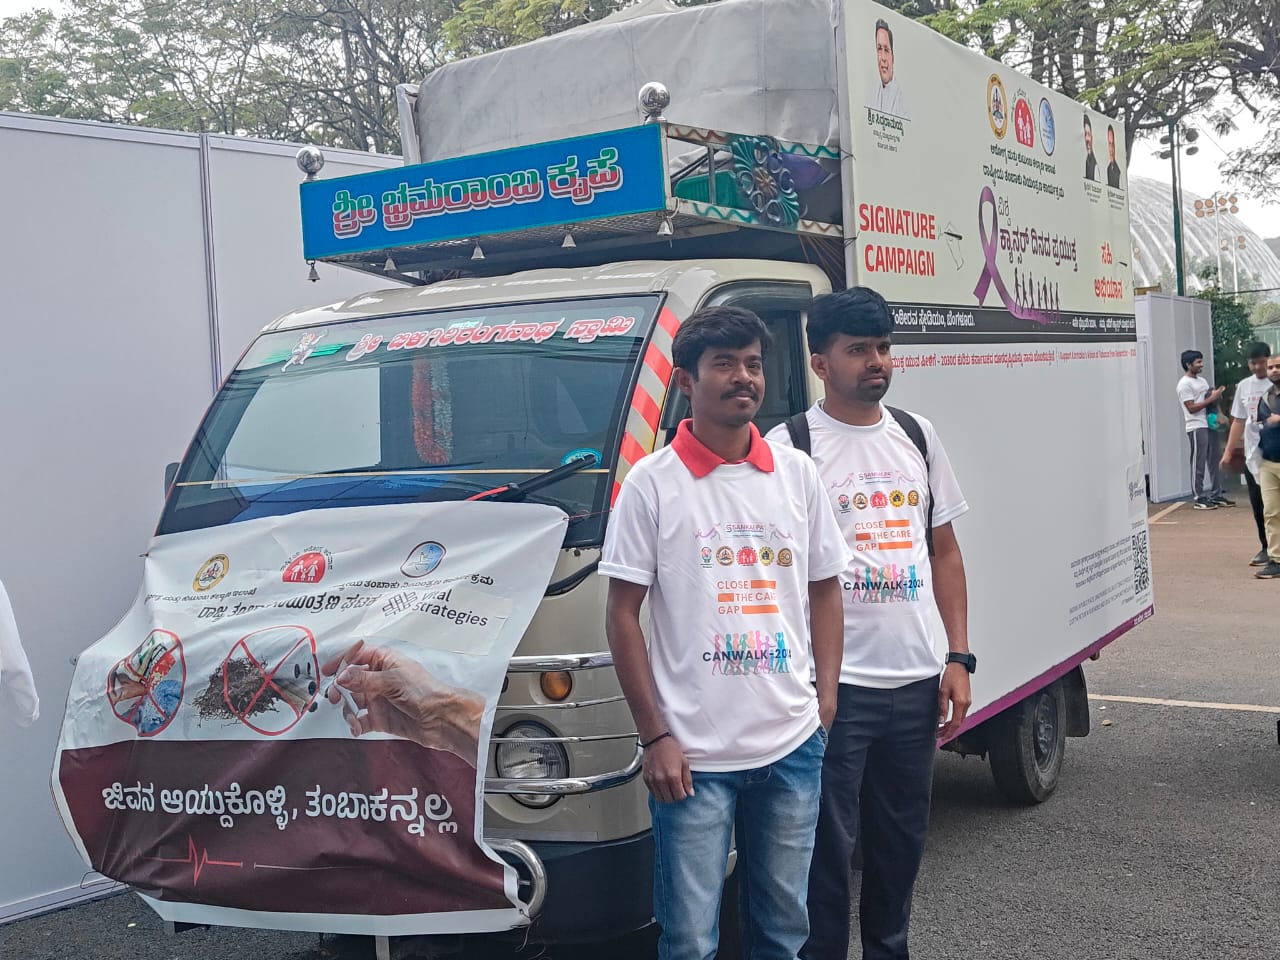 WORLD CANCER DAY SIGNATURE CAMPAIGN VEHICLE